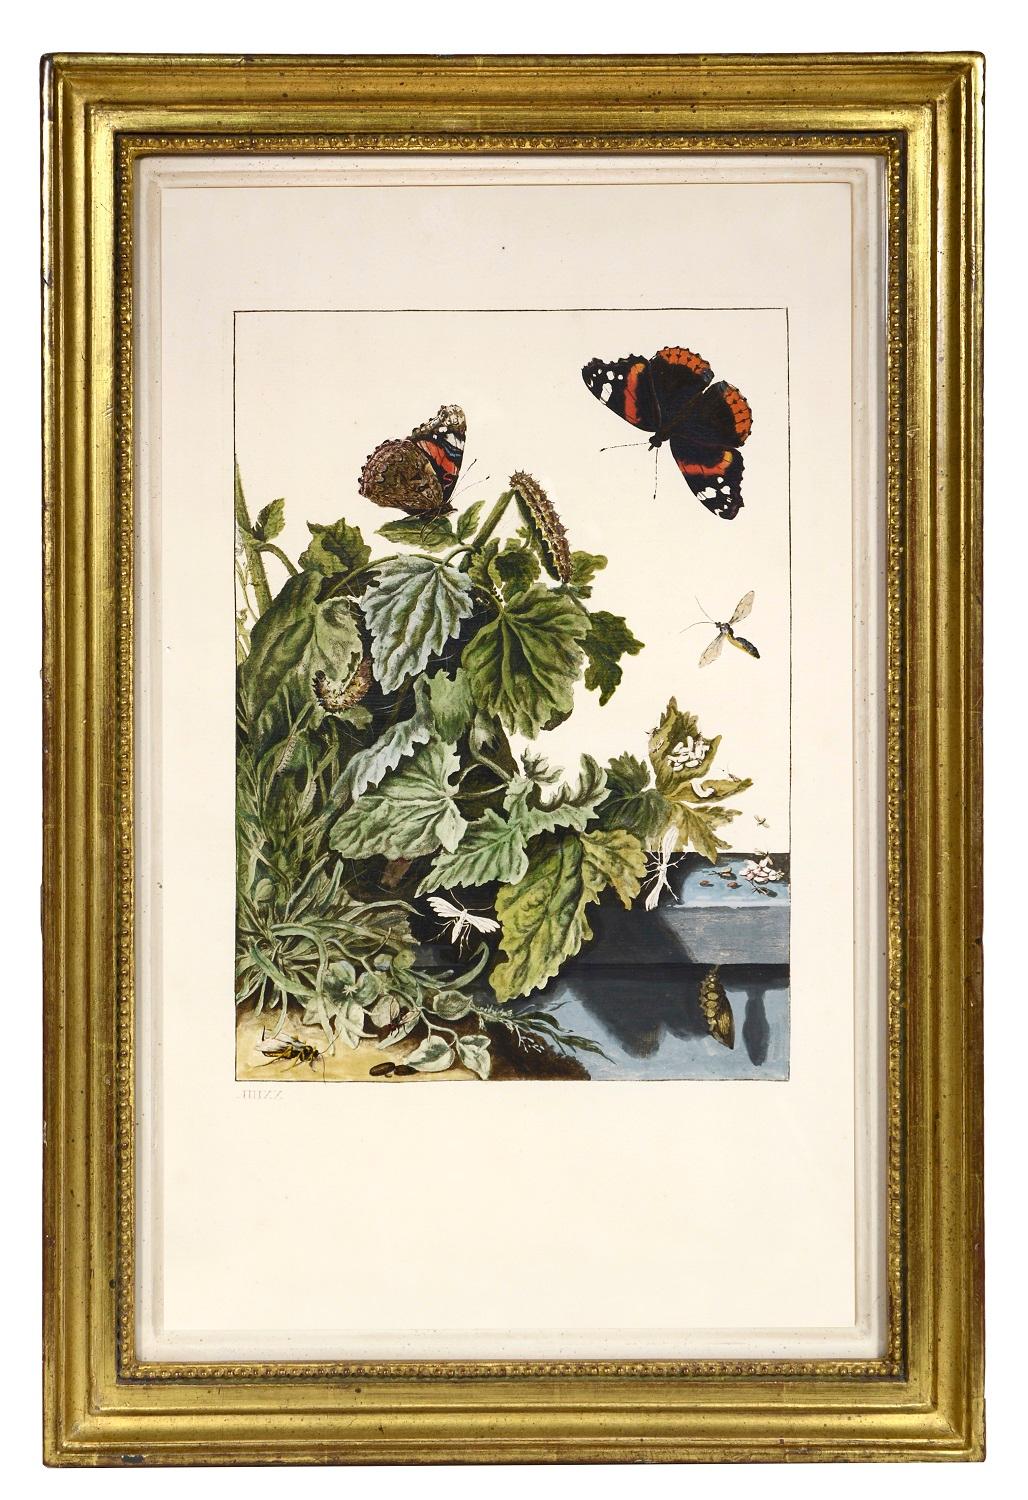 Group of Six Insects.    - Print by Jacob L'Admiral